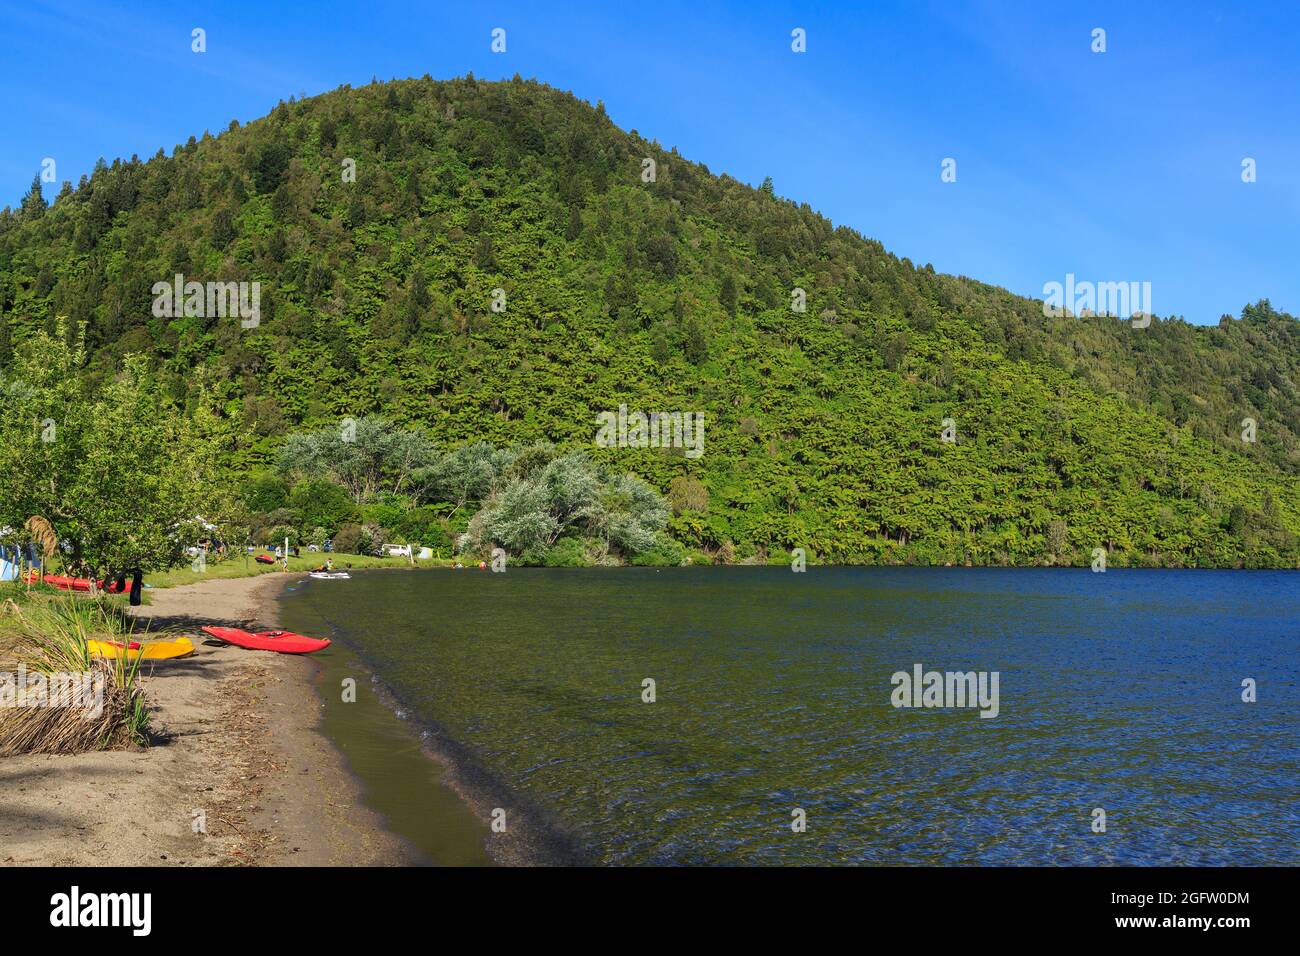 Lake Okareka in the Rotorua Lakes district, New Zealand. Kayaks rest on the shore at the Department of Conservation campsite Stock Photo